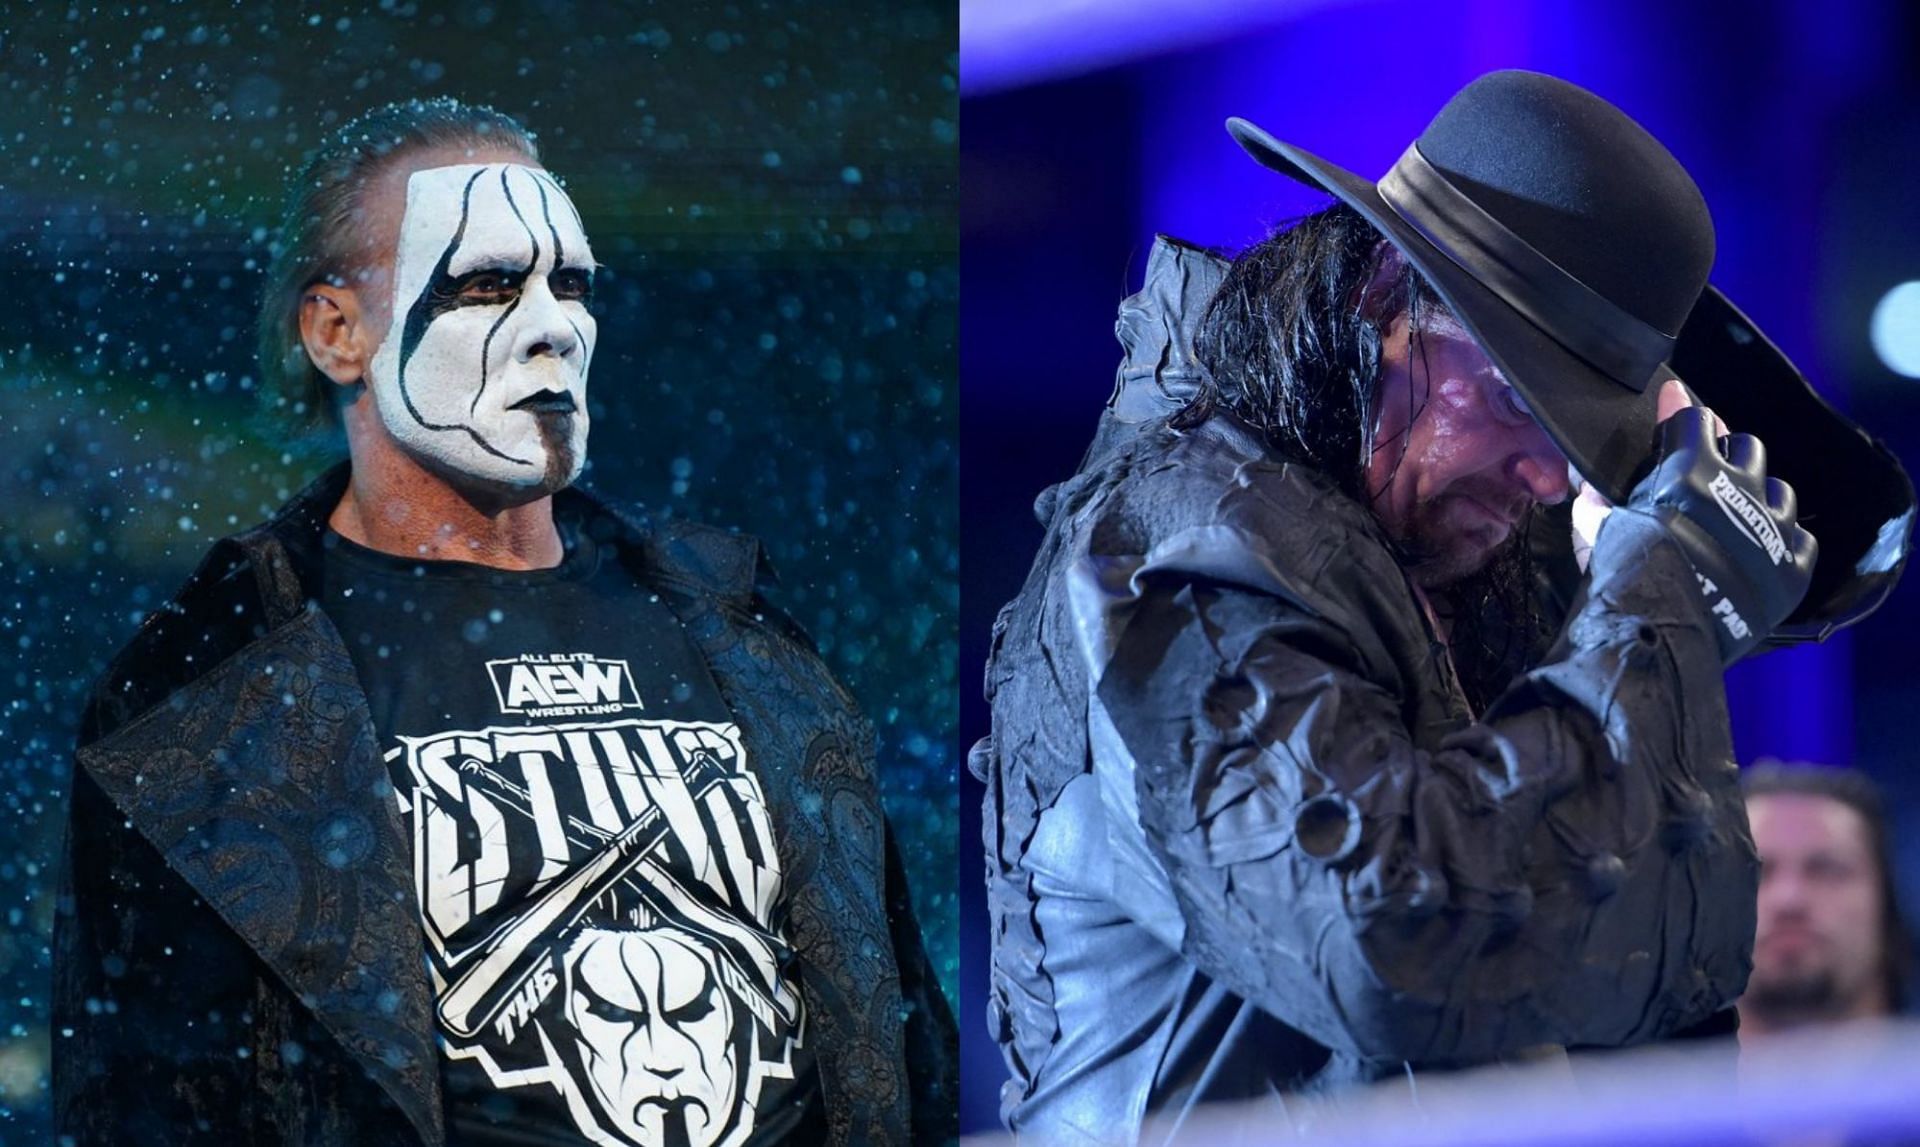 Sting vs. Undertaker will remain a dream match for many fans